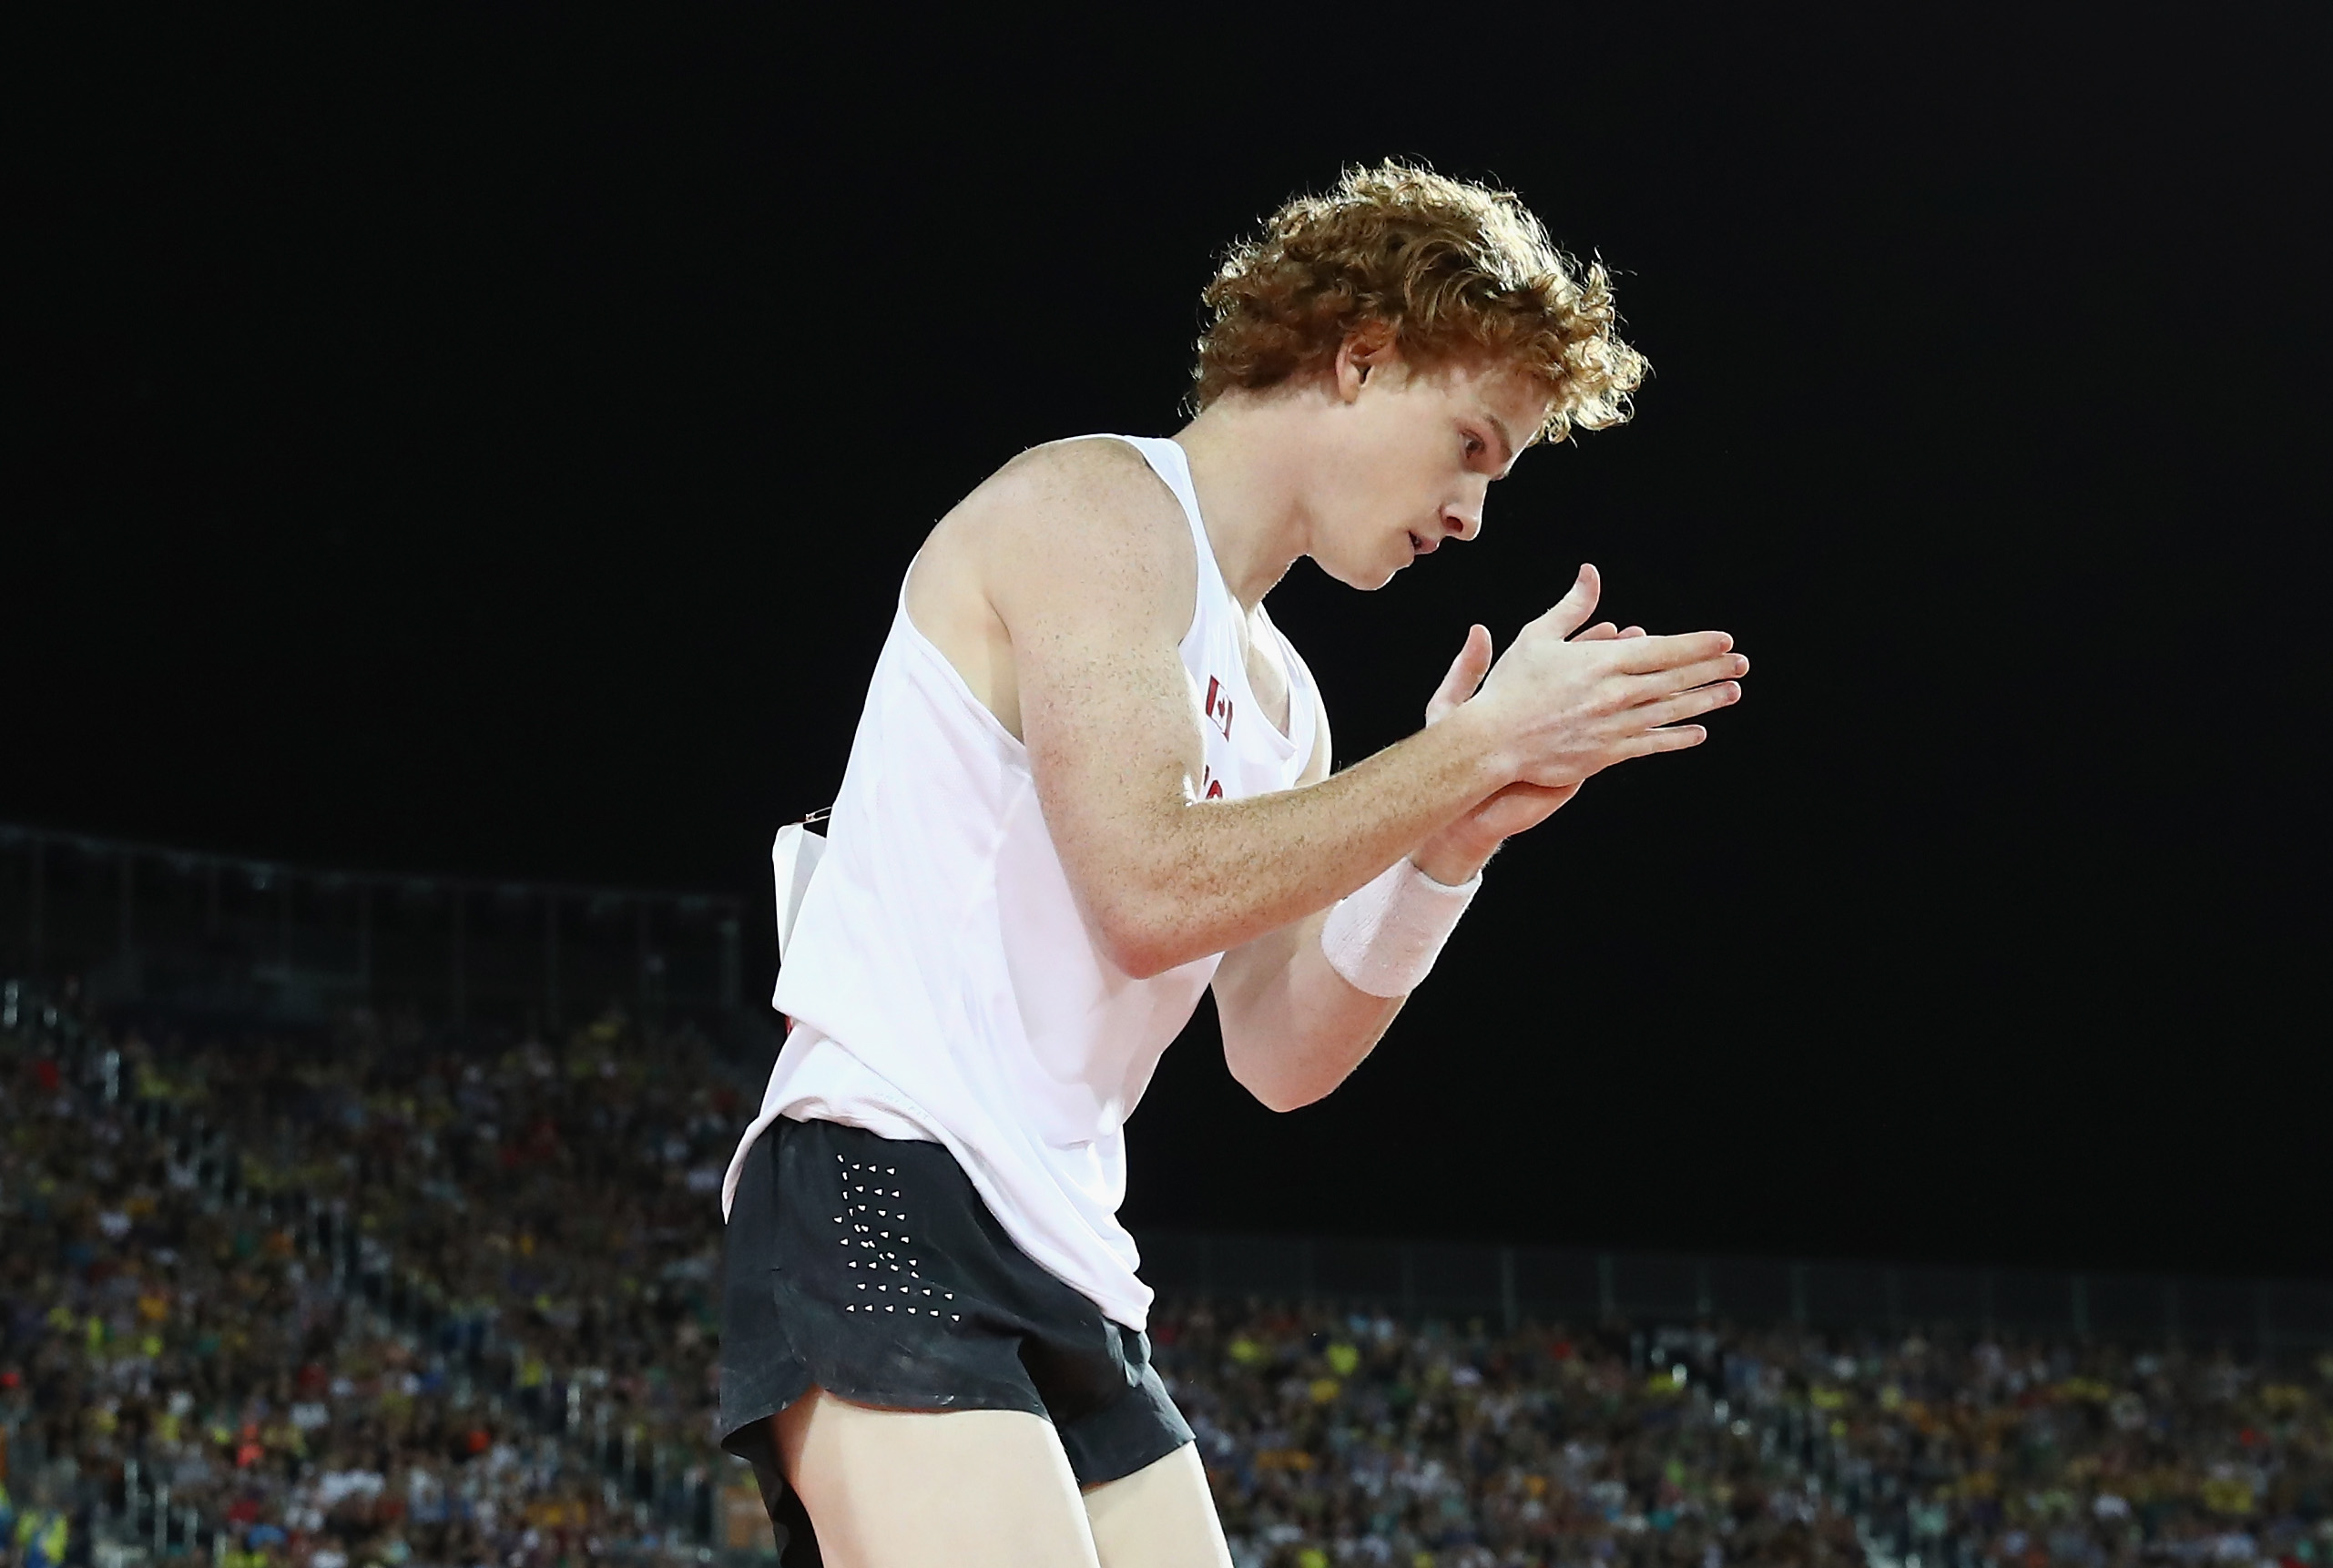 Shawn Barber during the Gold Coast 2018 Commonwealth Games at Carrara Stadium on April 12, 2018, on the Gold Coast, Australia. | Source: Getty Images